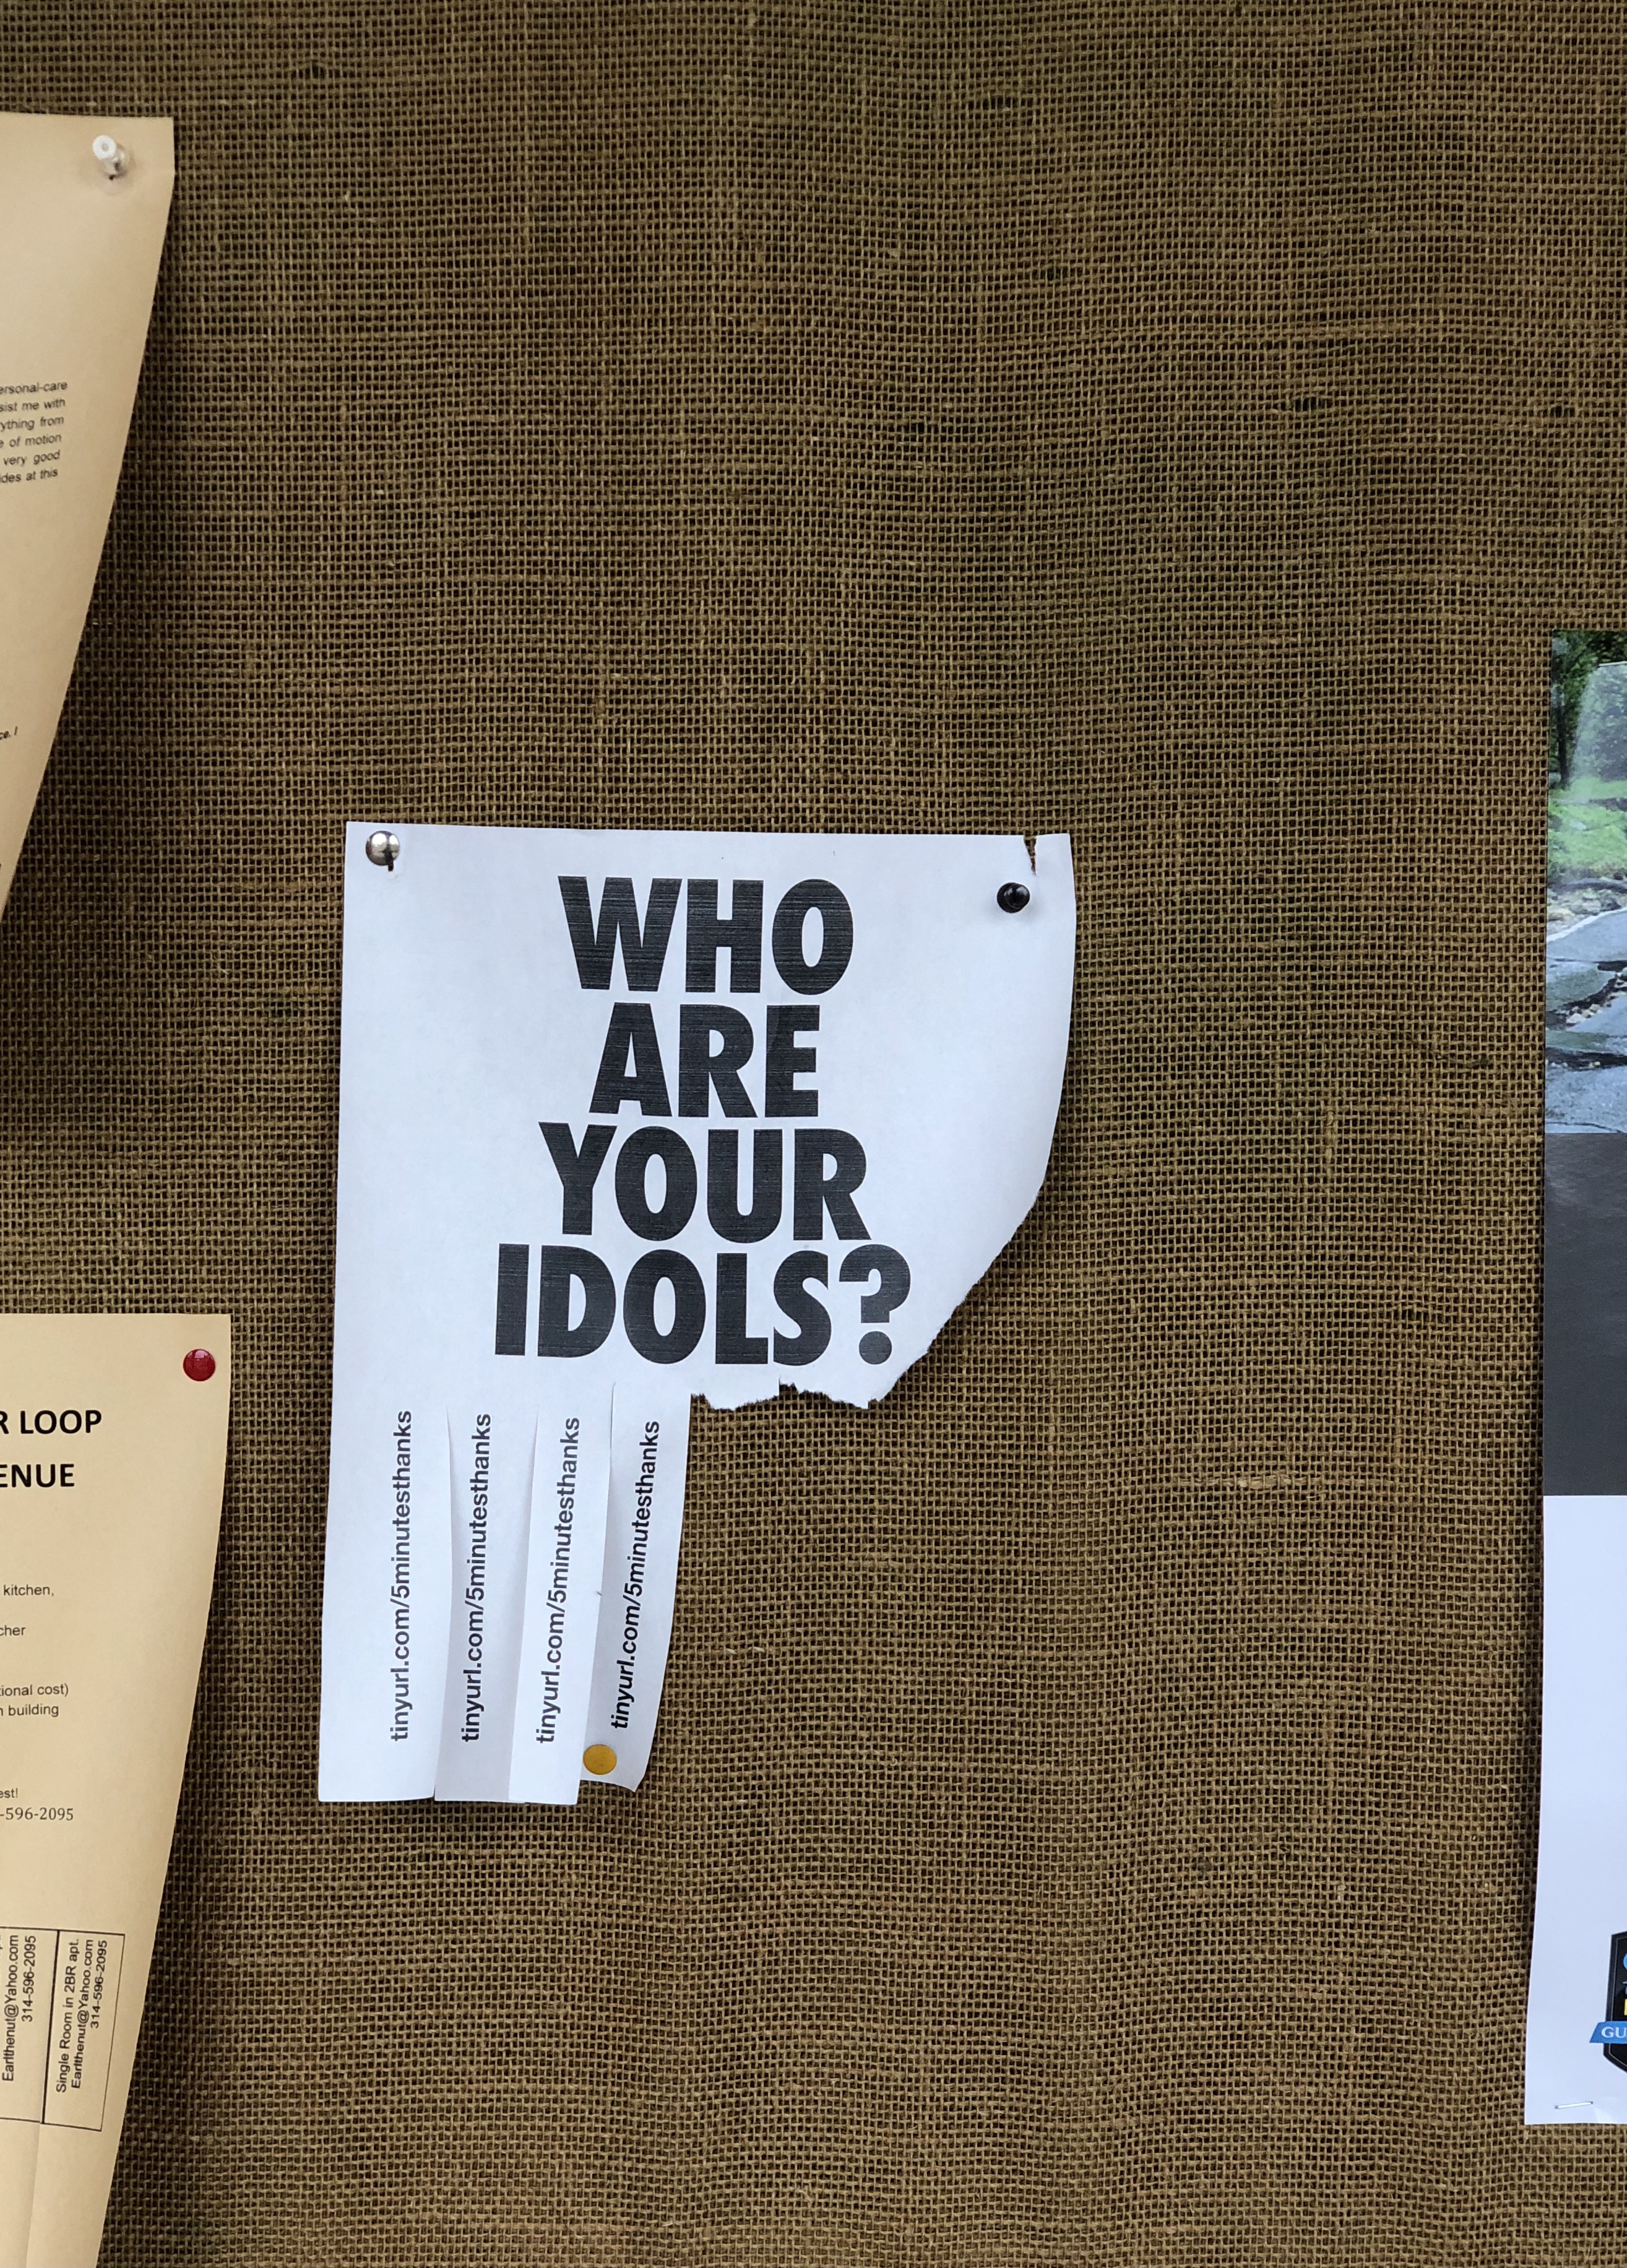 a flyer with text 'WHO ARE YOU IDOLS?'' in a bold, black font in the center, pinned to a board.